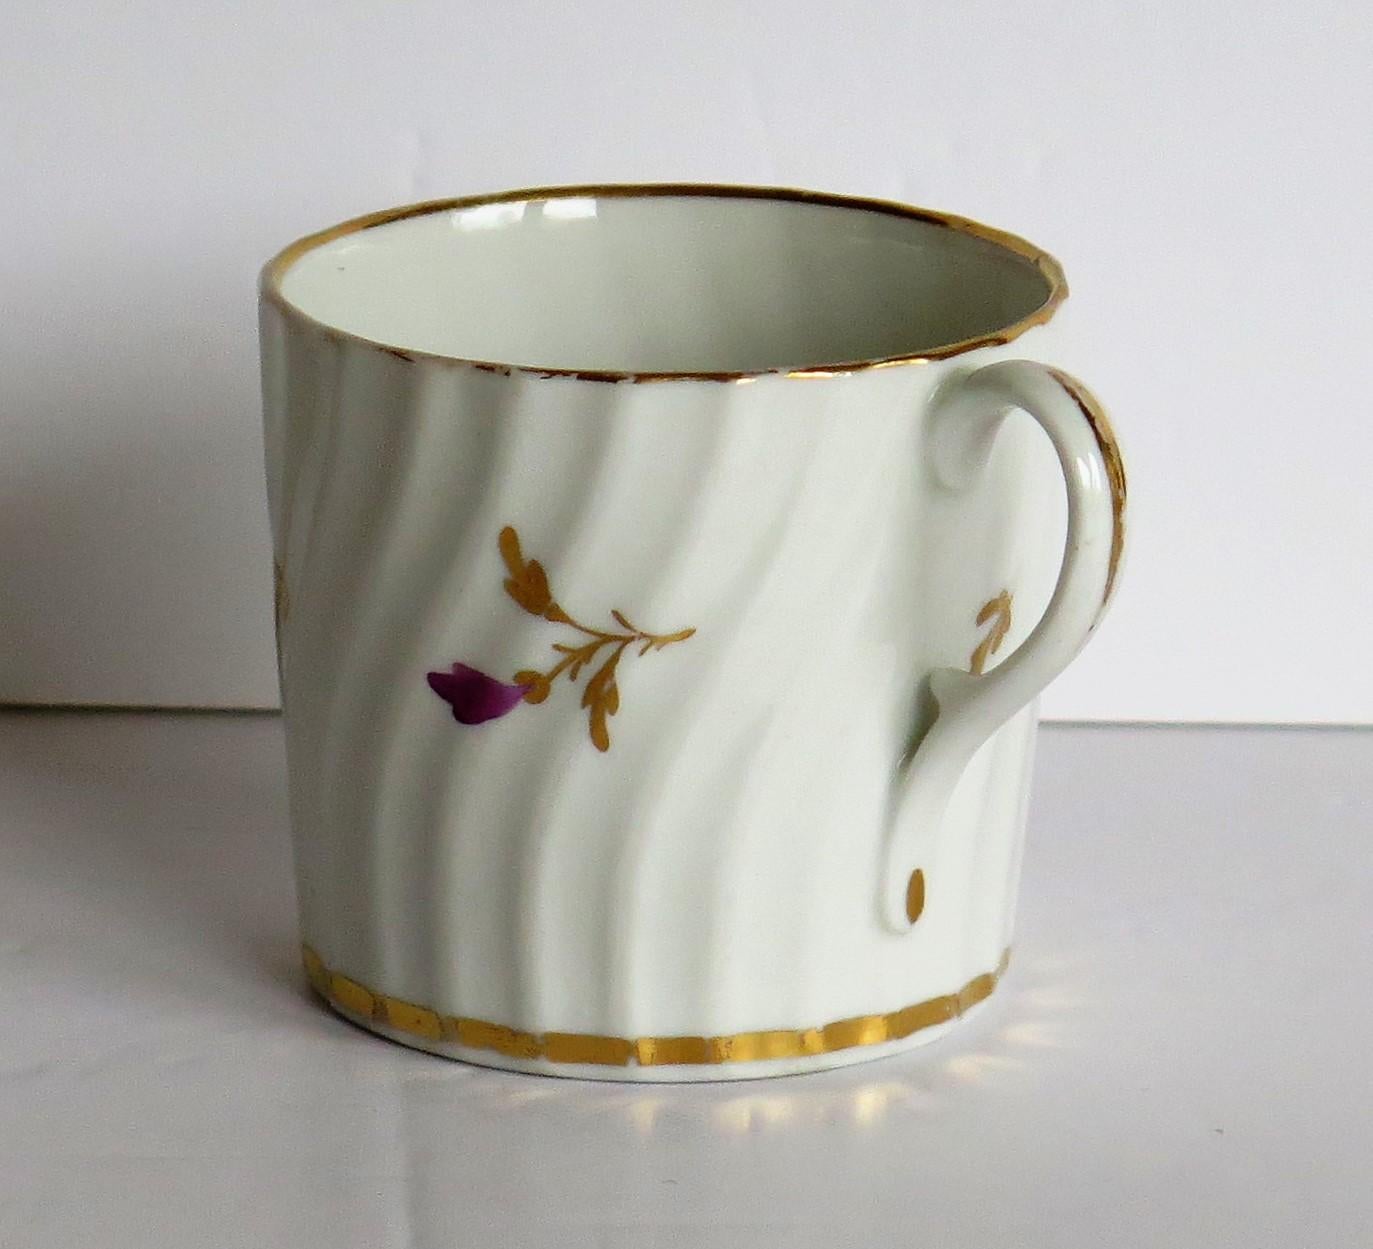 This is a very good decorative and collectable, hand painted porcelain coffee can (cup), possibly made by Grainger of Grainger, Wood & Co., Worcester, England at the turn of the 18th century, George III period, circa 1800.

The coffee can has a